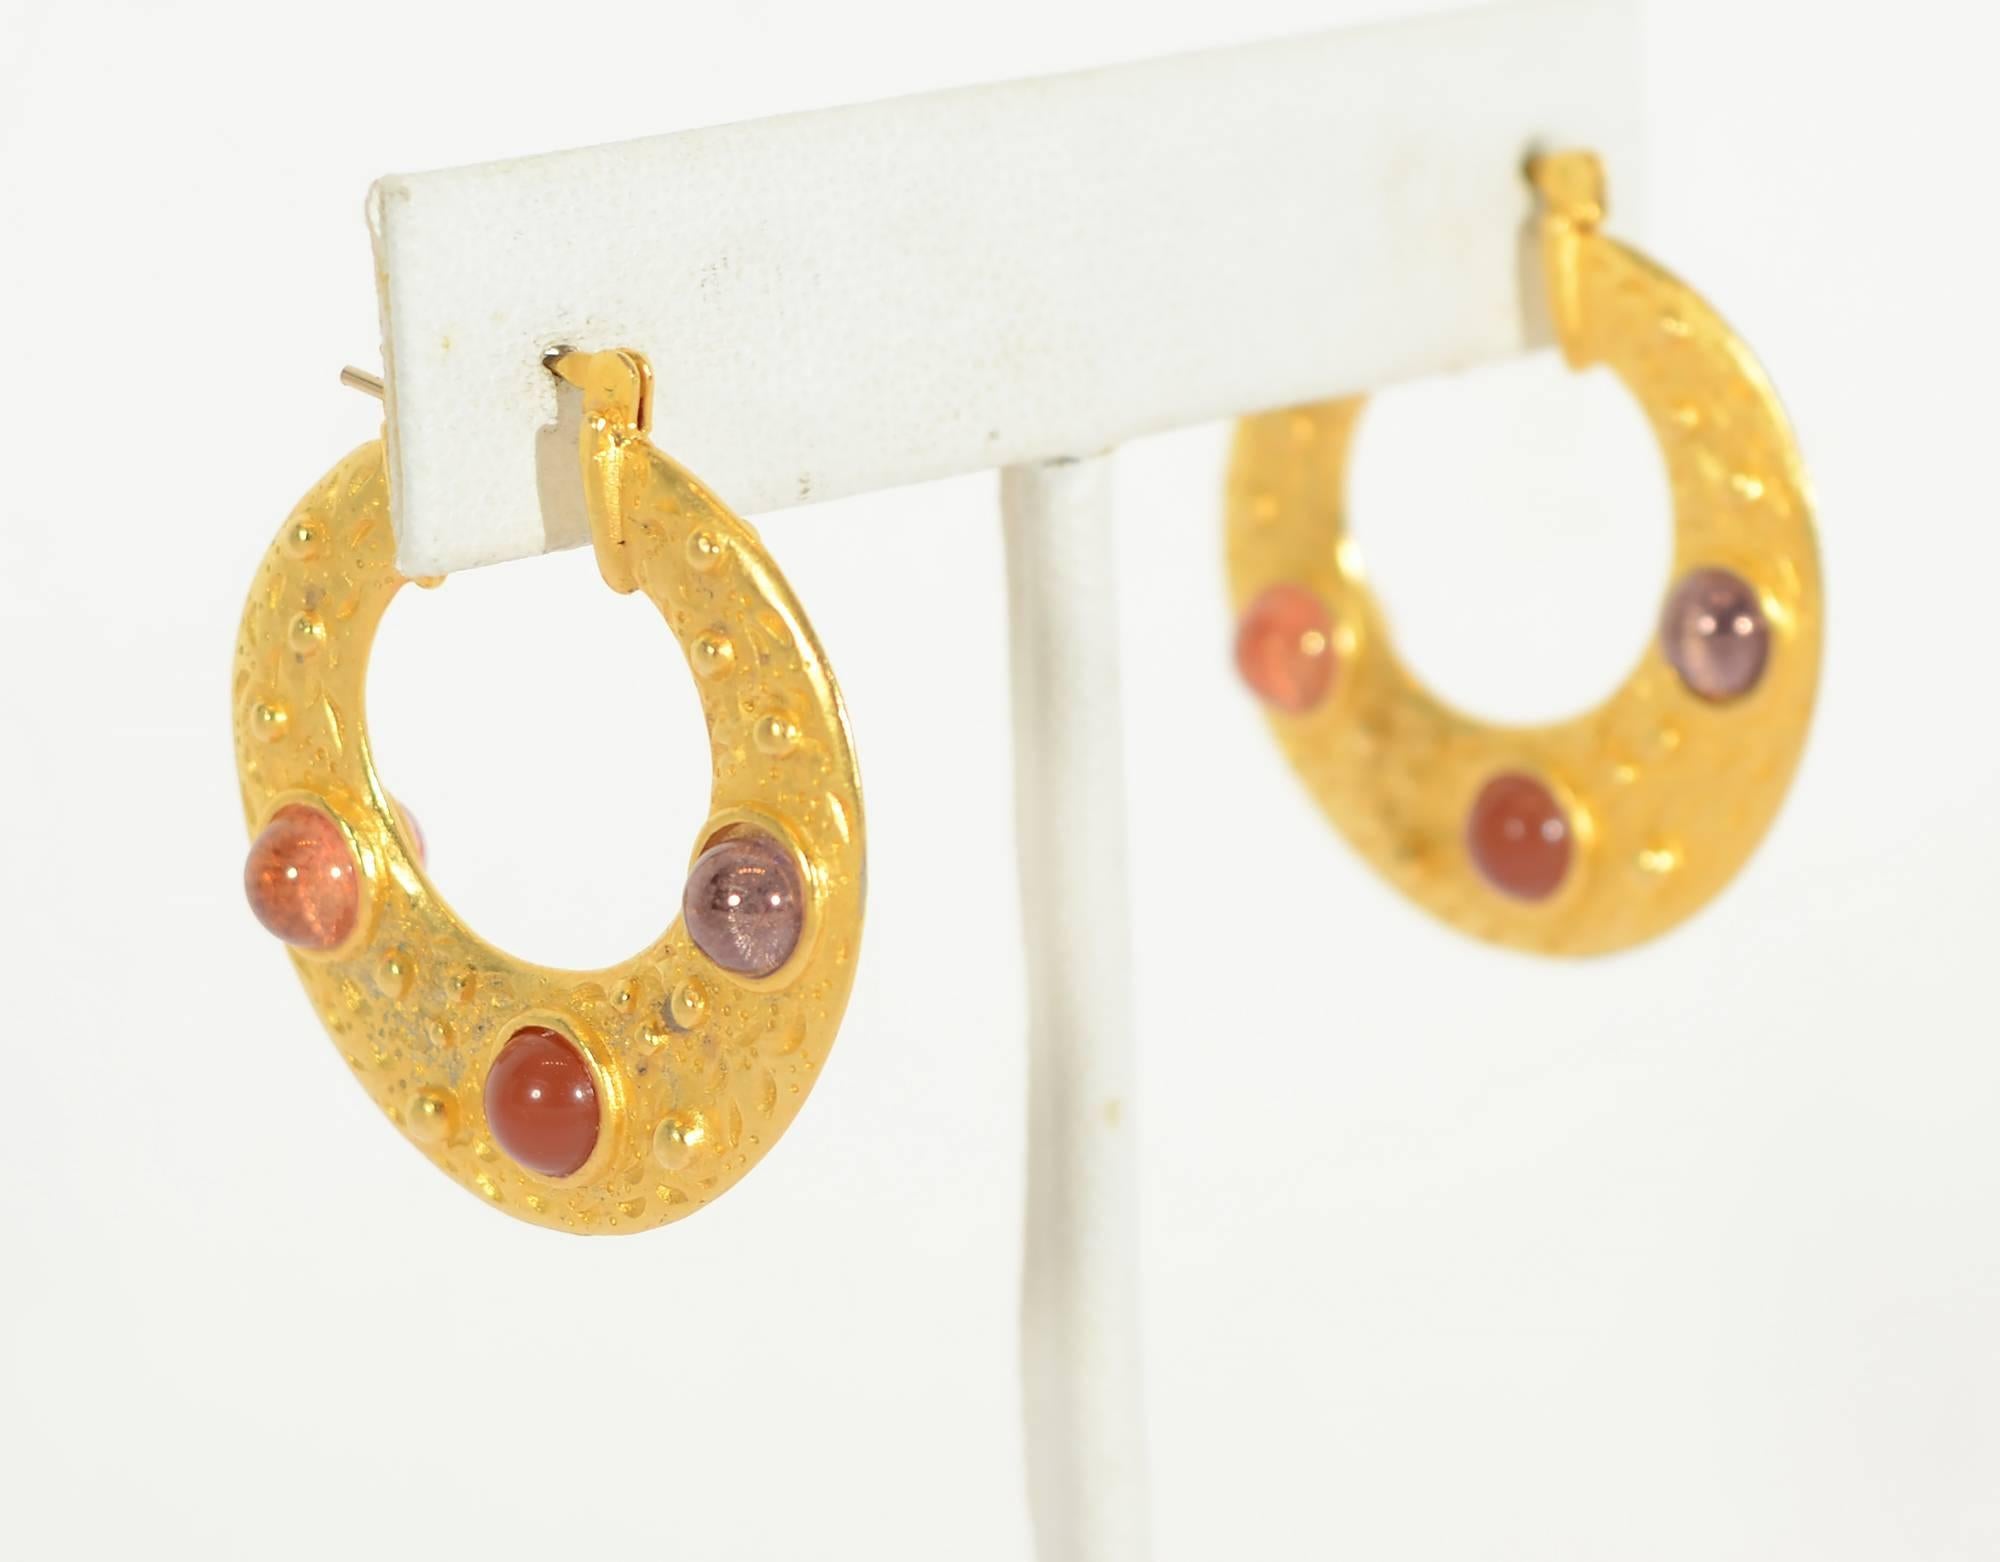 Beautifully textured 22 karat gold hoop earrings with three inlaid stones. Carnelian is in the center and quartz on either side. The hoops measure 1 1/8